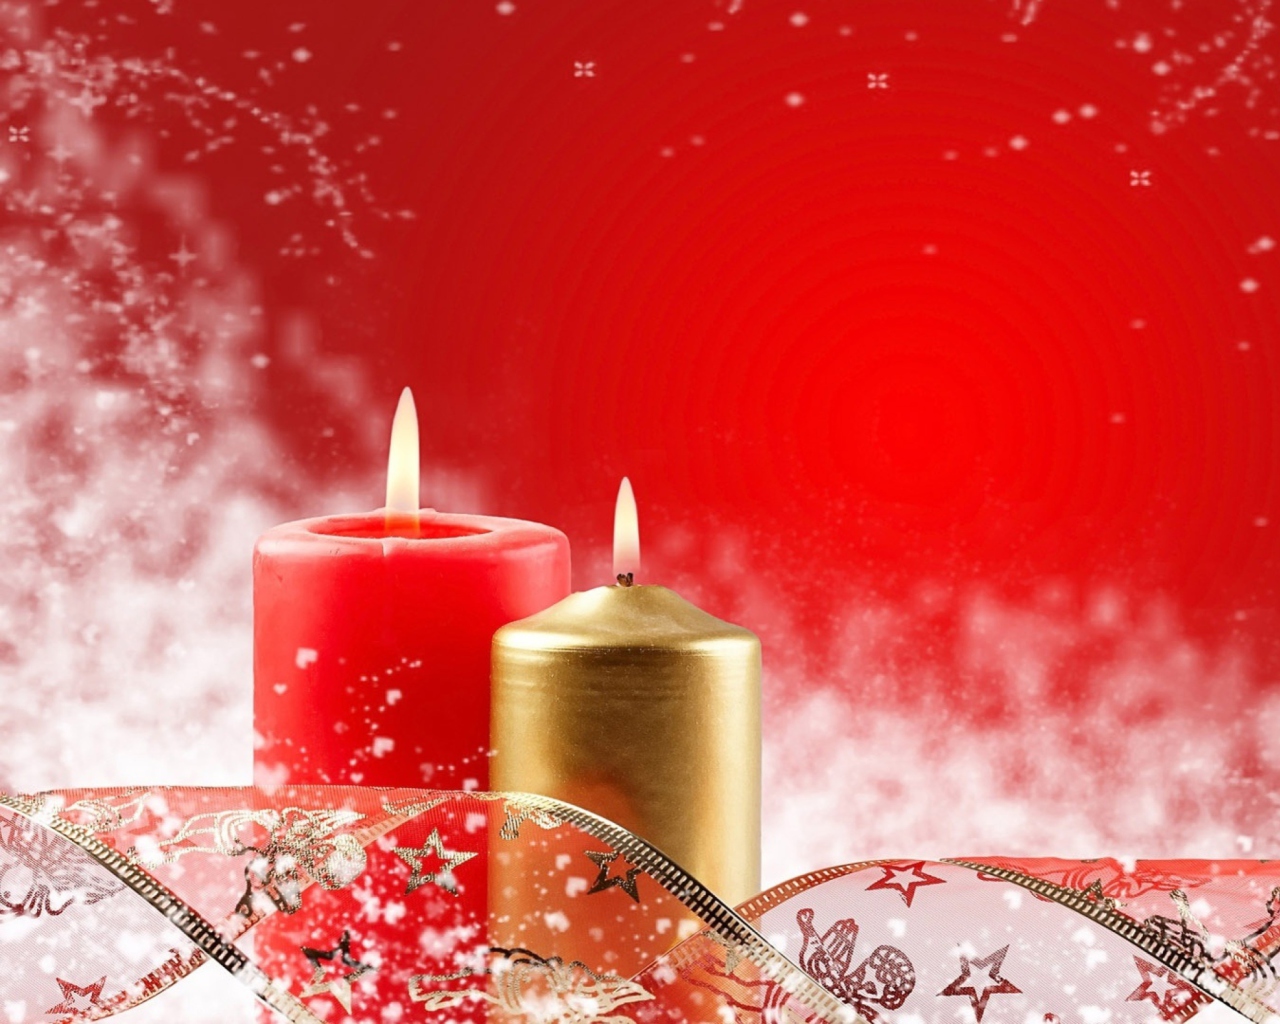 Two Christmas Candles wallpaper 1280x1024